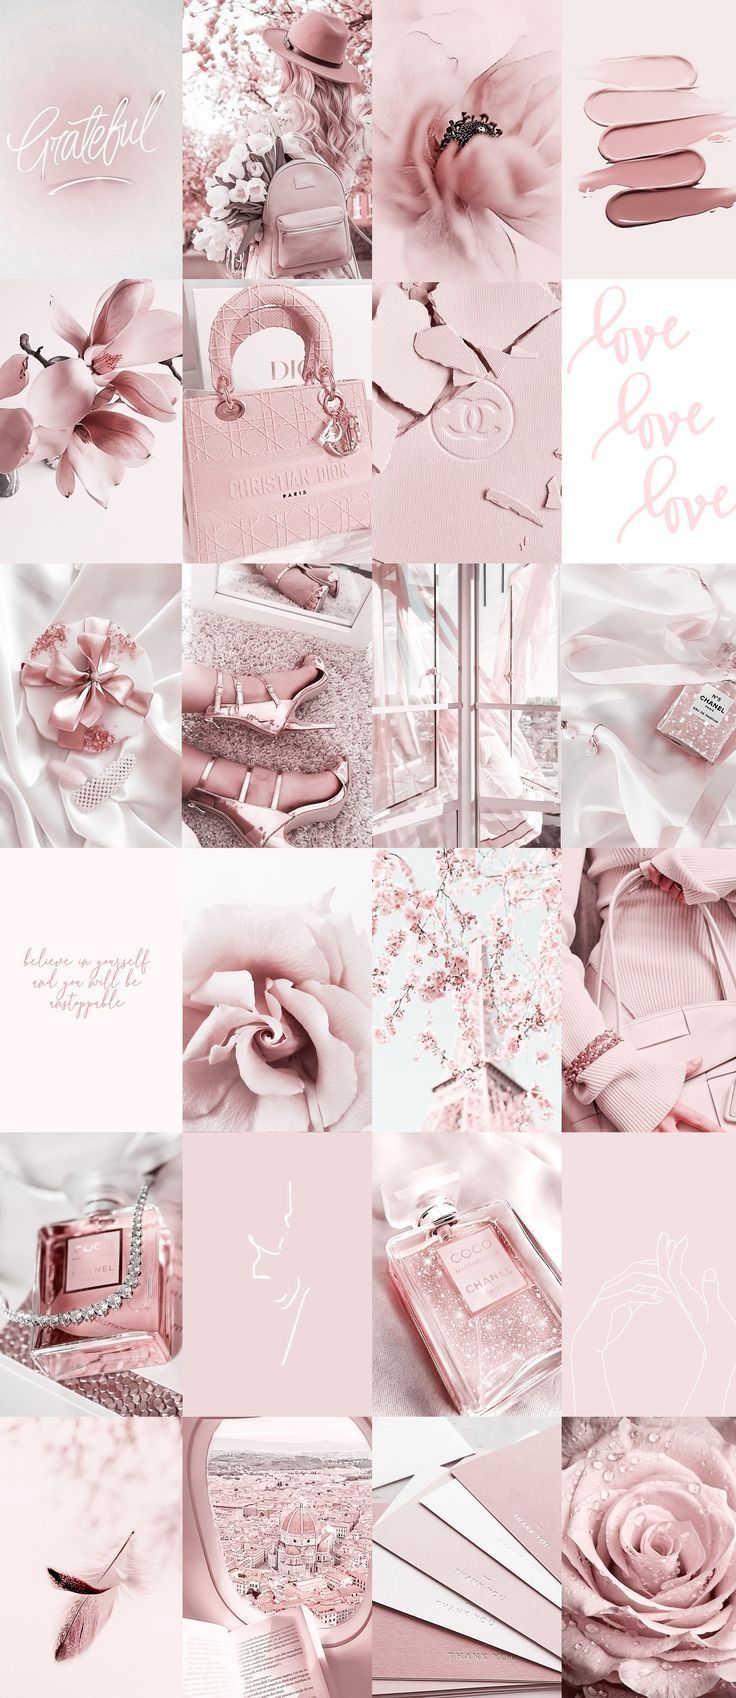 Blush Pink Wall Collage Kit Aesthetic 2 Dusty Pink Trendy UK. iPhone wallpaper girly, Pink wallpaper iphone, Pretty wallpaper iphone